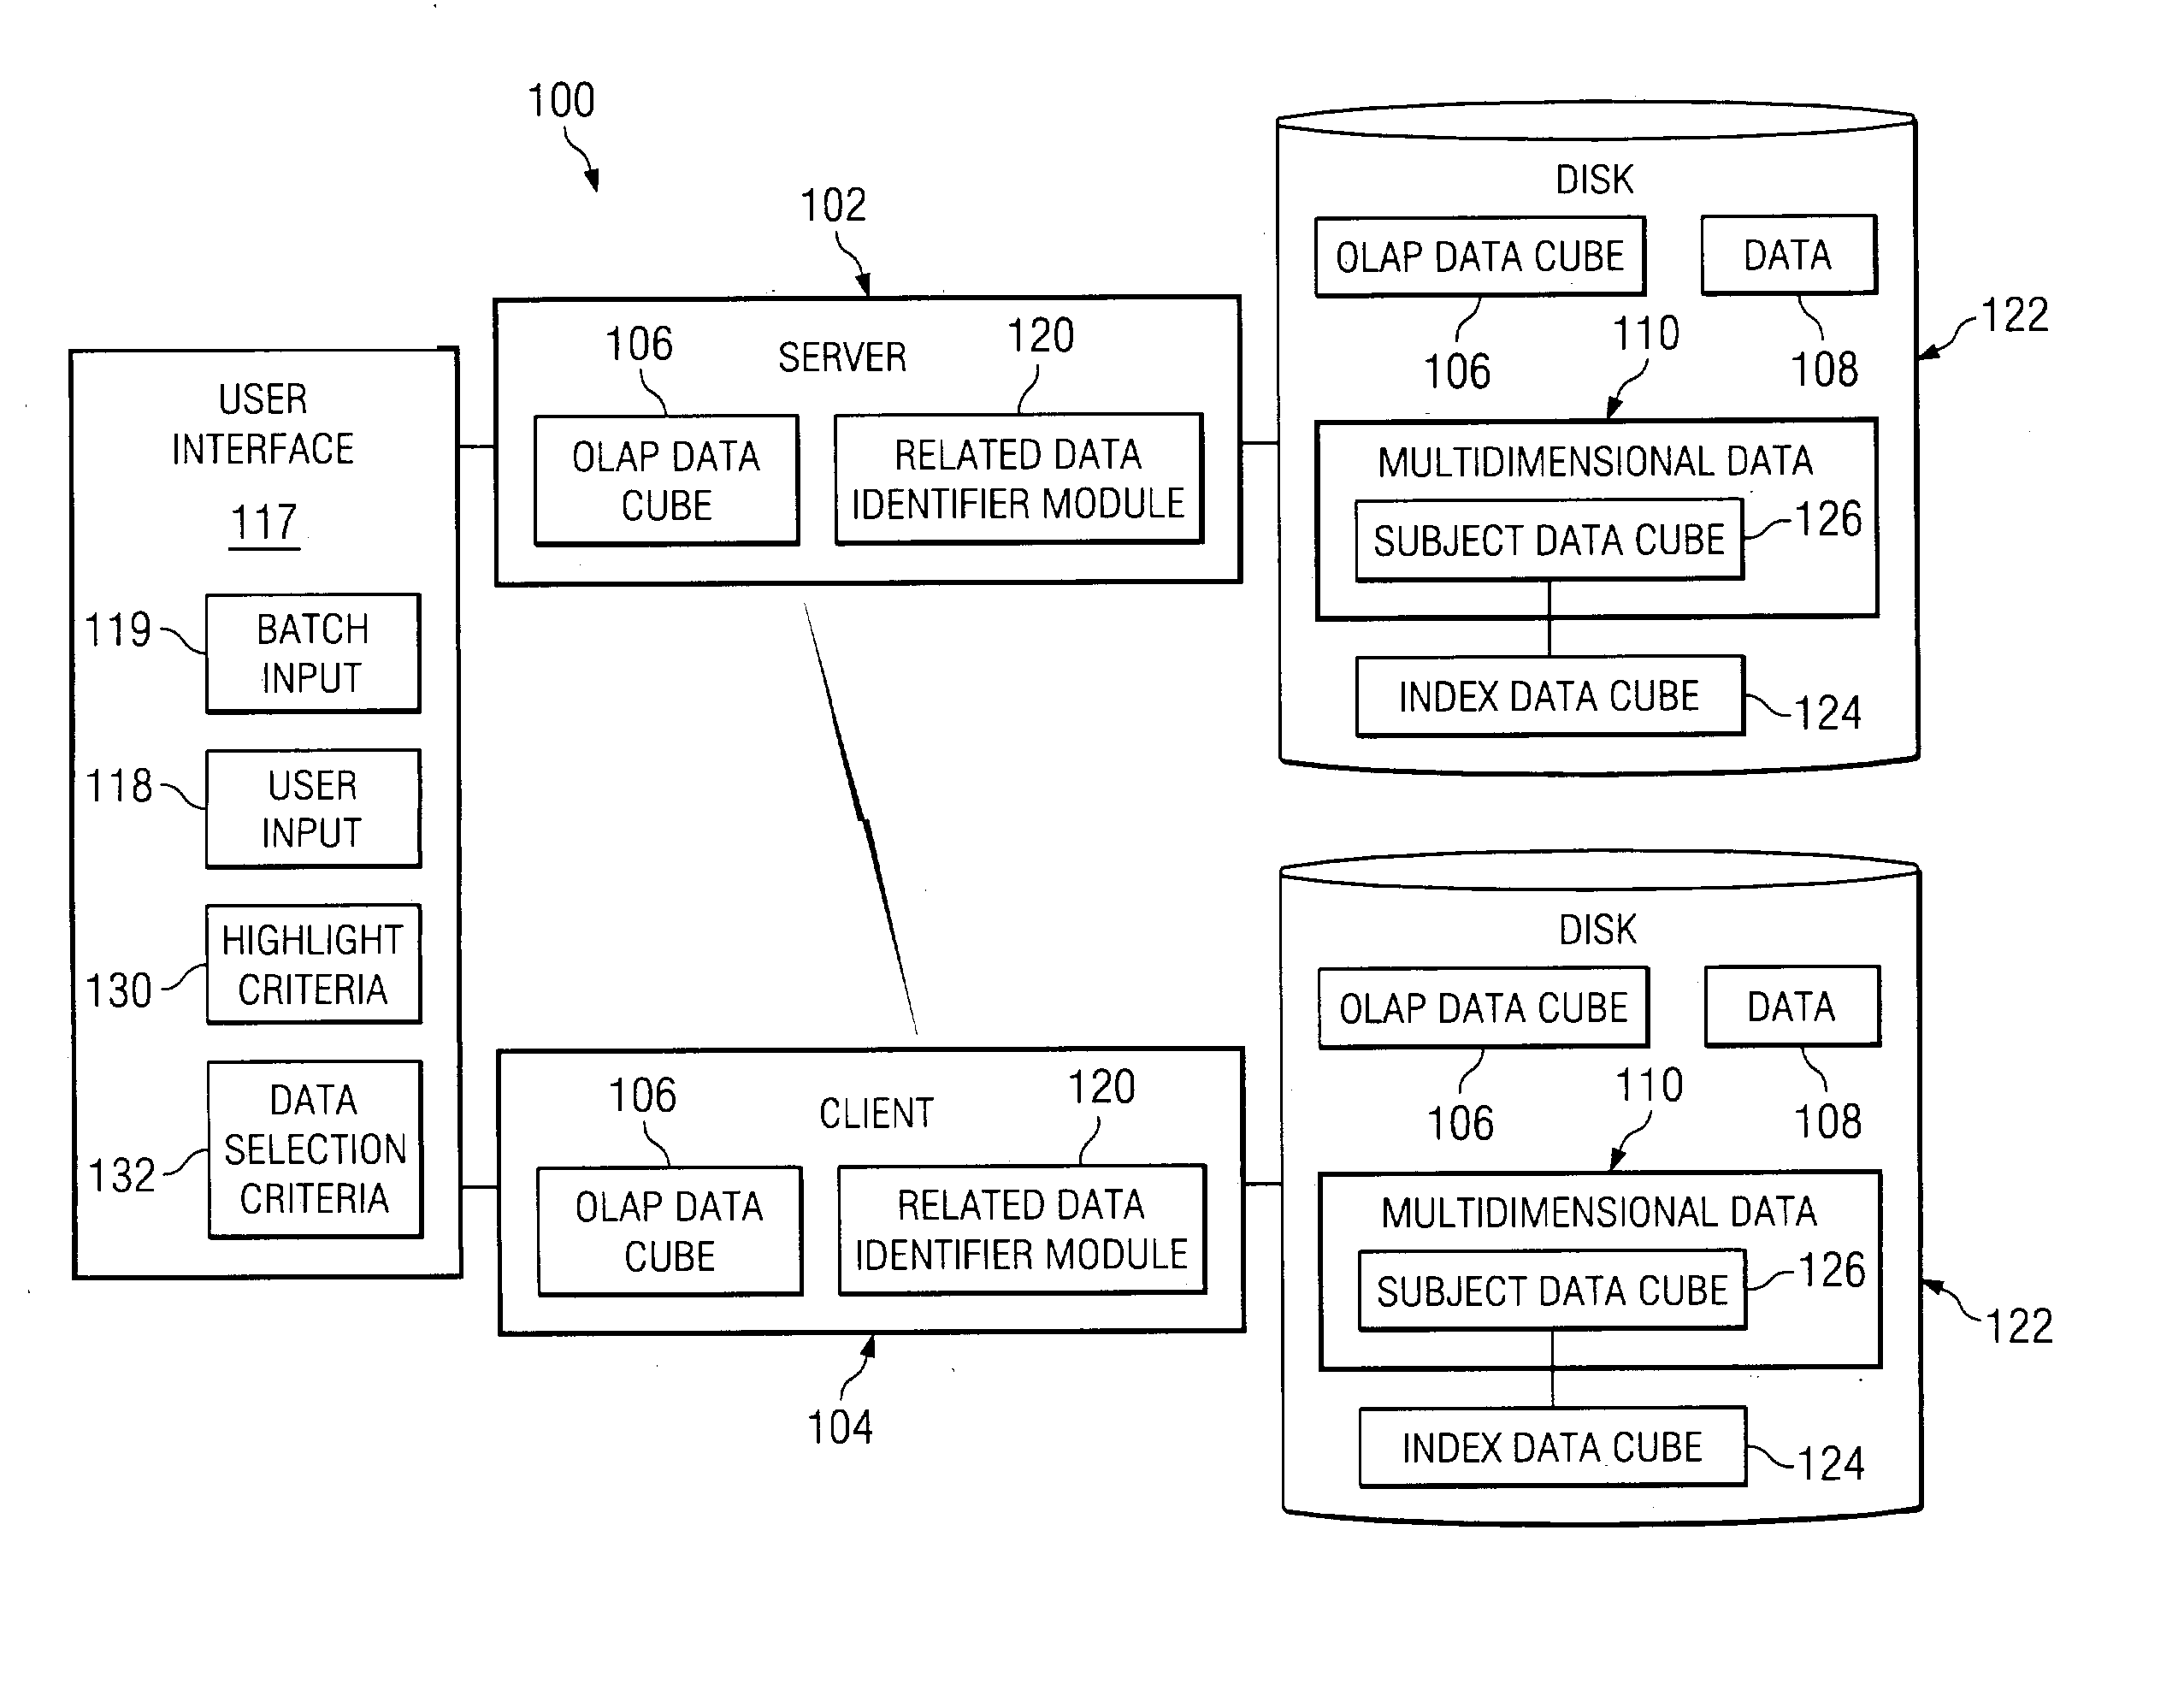 Systems, methods, and computer program products to identify related data in a multidimensional database